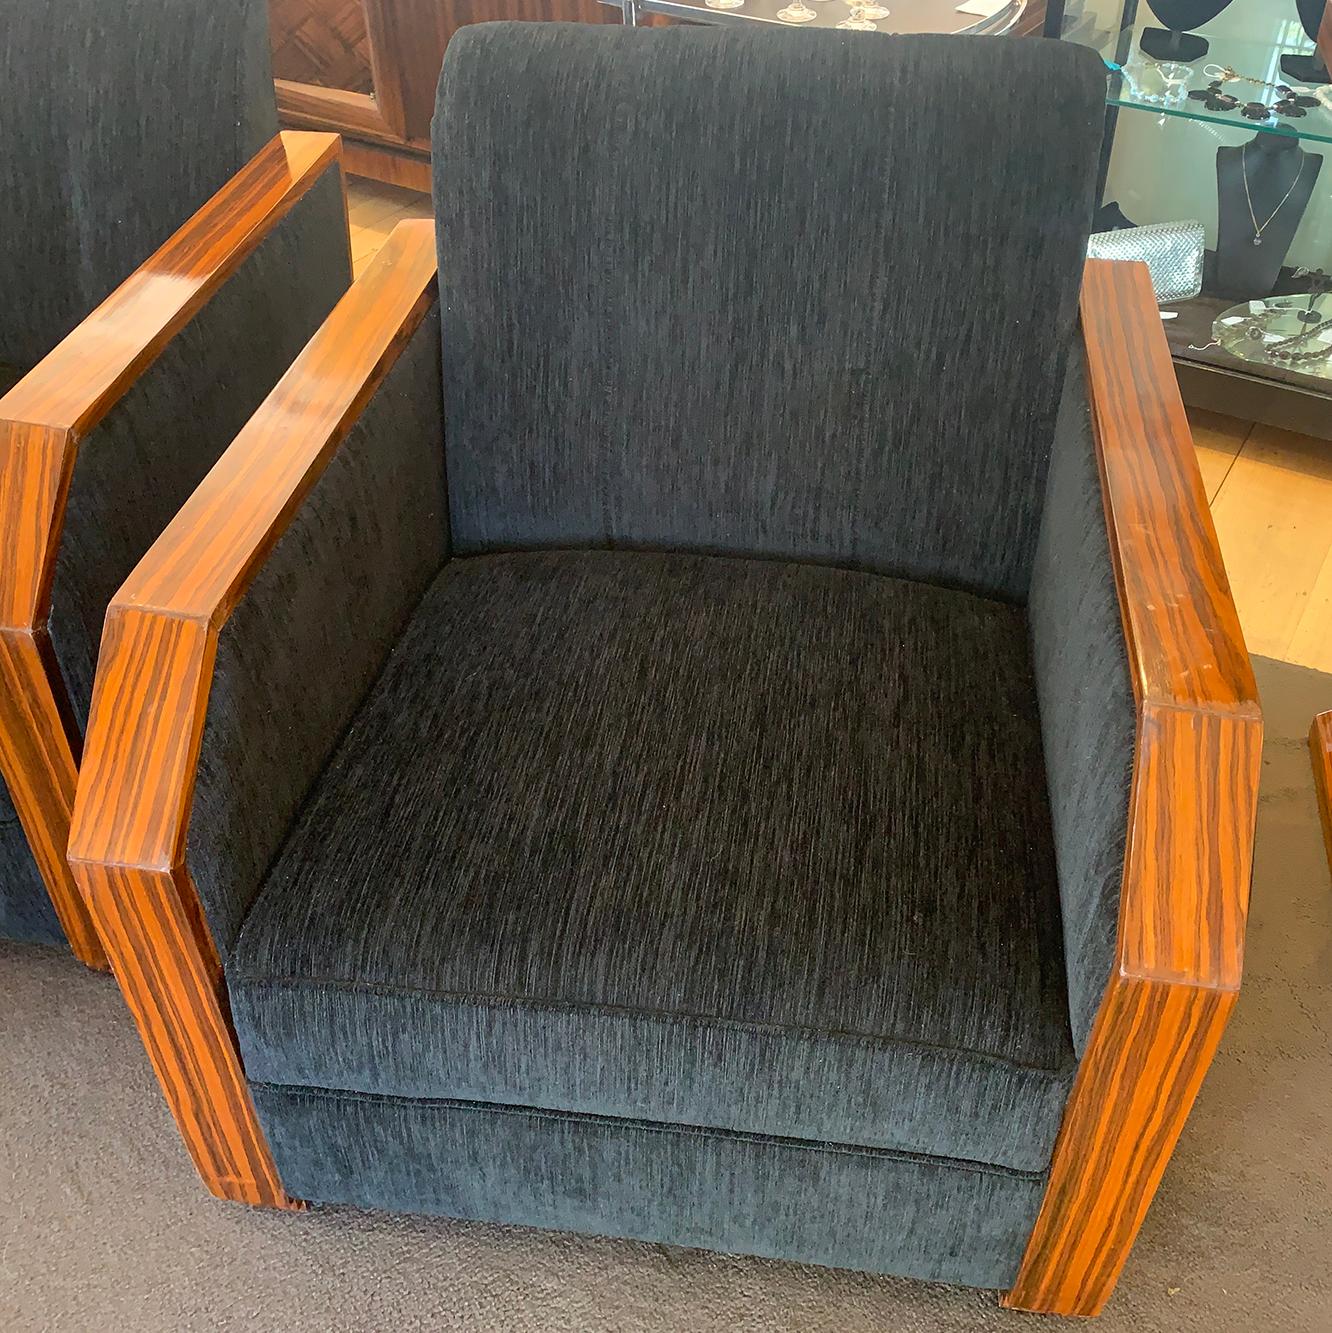 Art Deco pair armchairs in Macassar wood with glazed finish. Reupholstered in black commercial quality, textured Velvet, very close to original fabric. Excellent presentation with a soft age Patina, some very minor timber marks as per age, but the